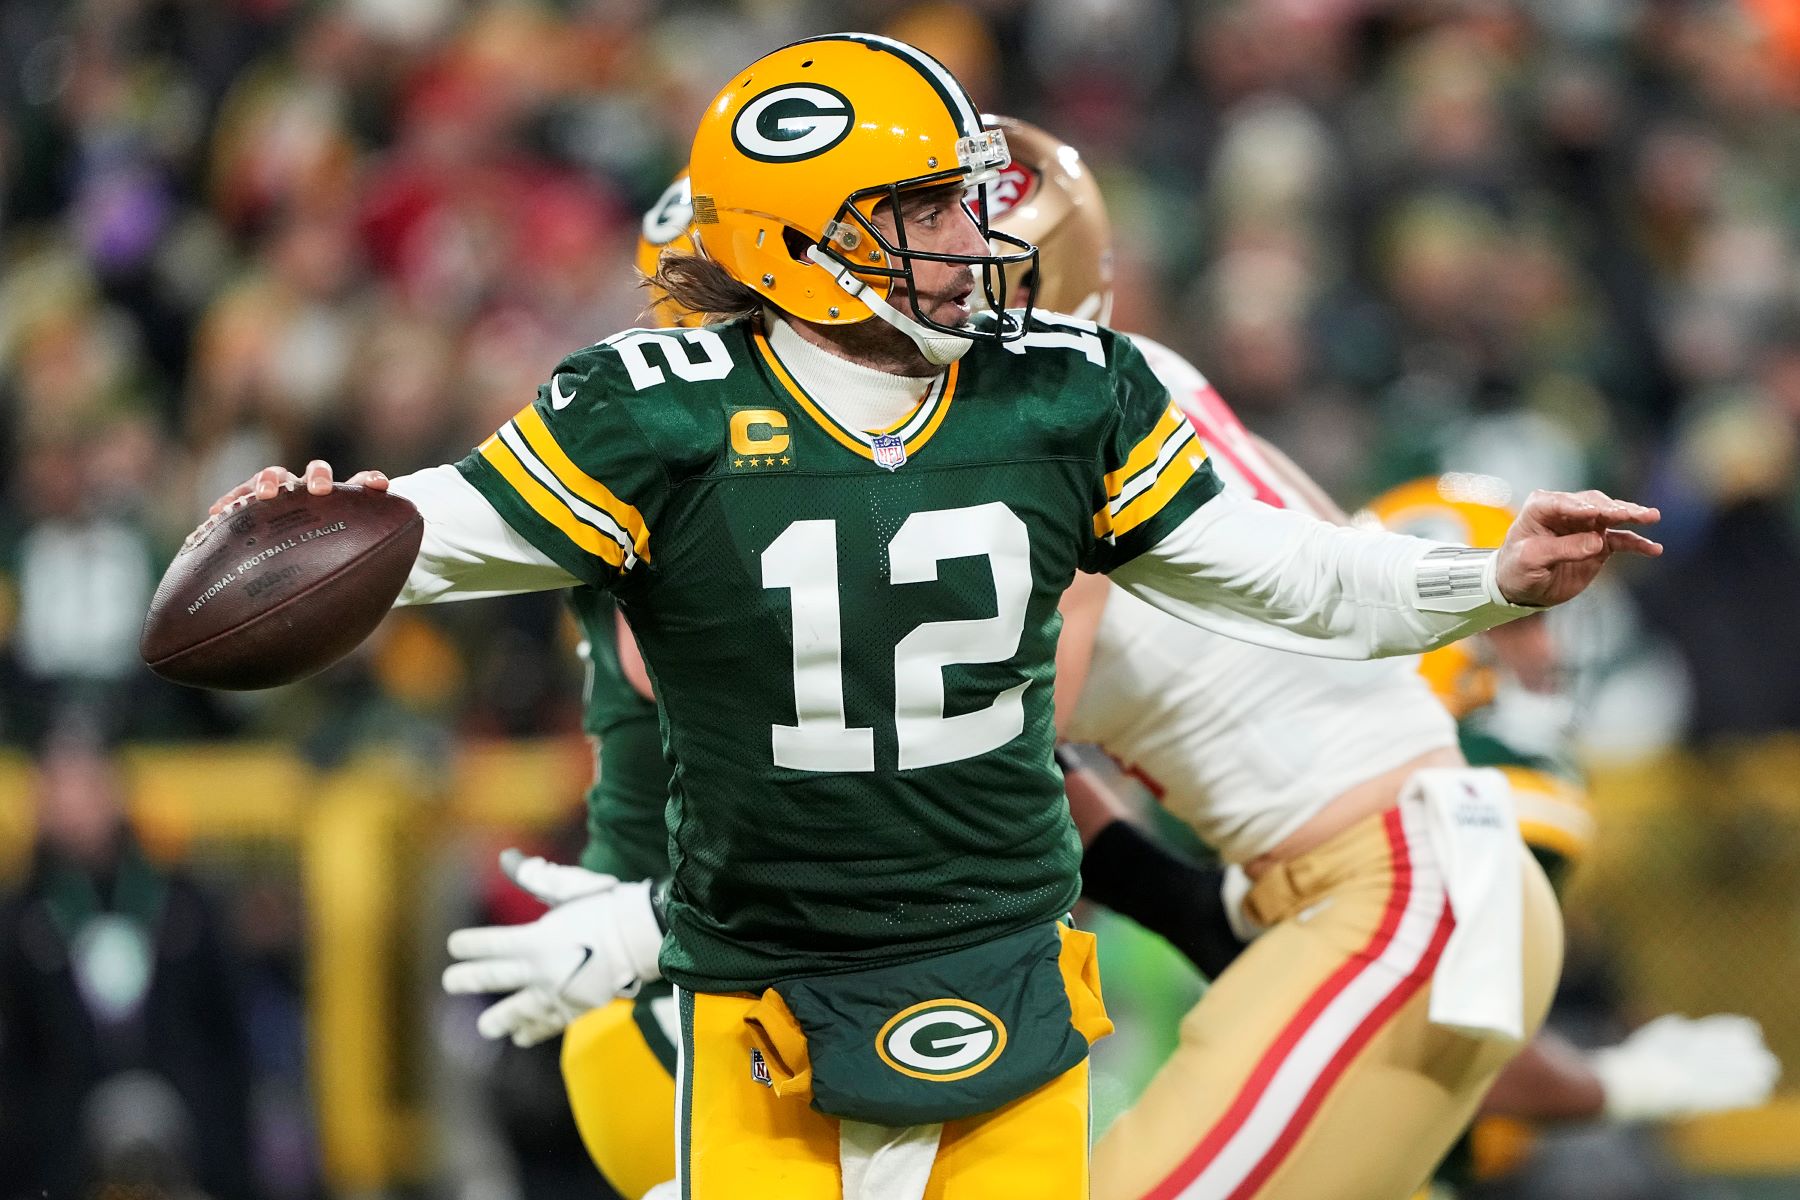 Quarterback Aaron Rodgers as #12 on the Green Bay Packers NFL team during a game against the San Francisco 49ers